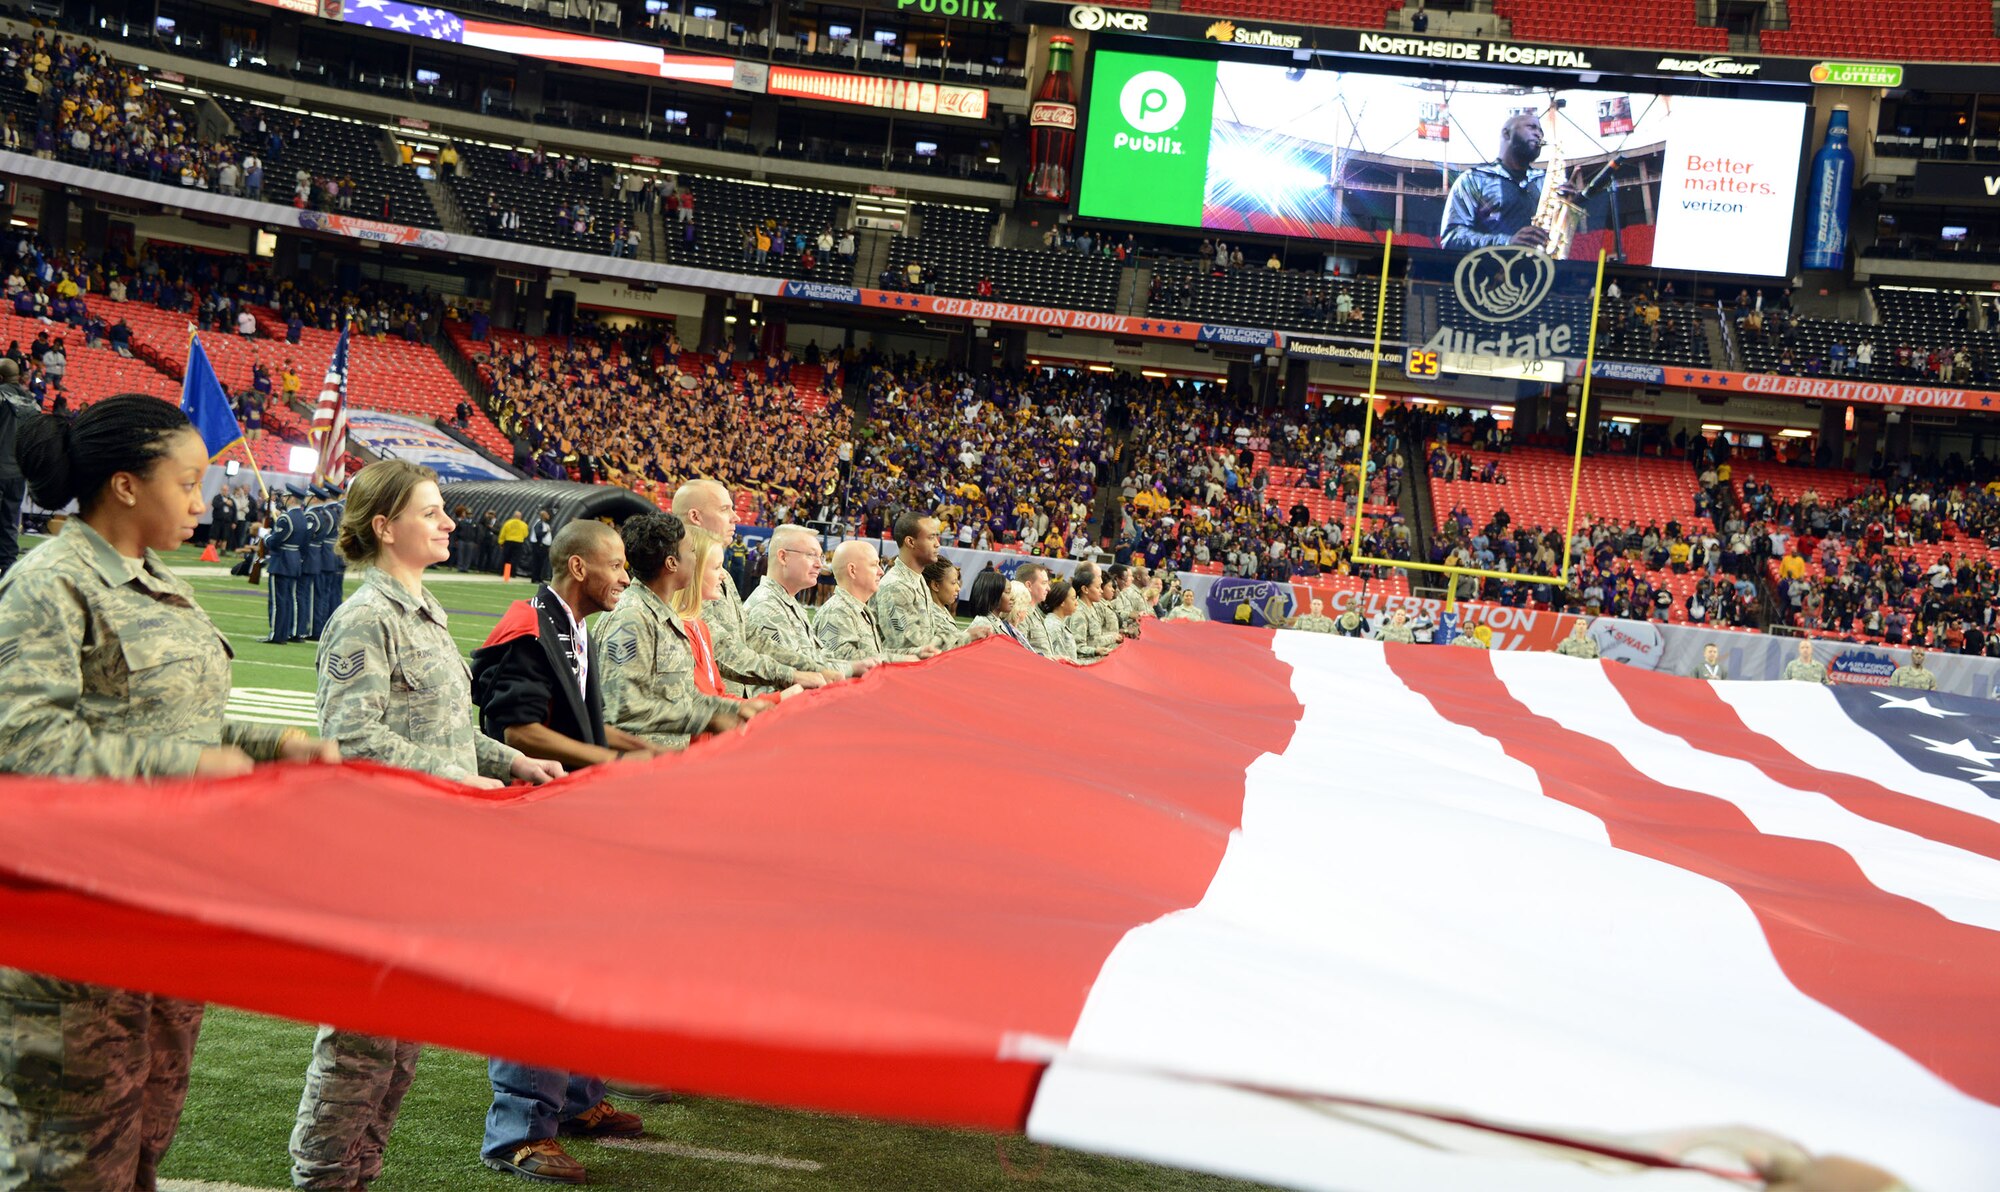 A team of 60 Air Force Reservist's and family members hold the American flag during the national anthem at the Air Force Reserve Celebration Bowl Dec. 19 at the Georgia Dome. (Air Force photo/Master Sgt. Chance Babin)